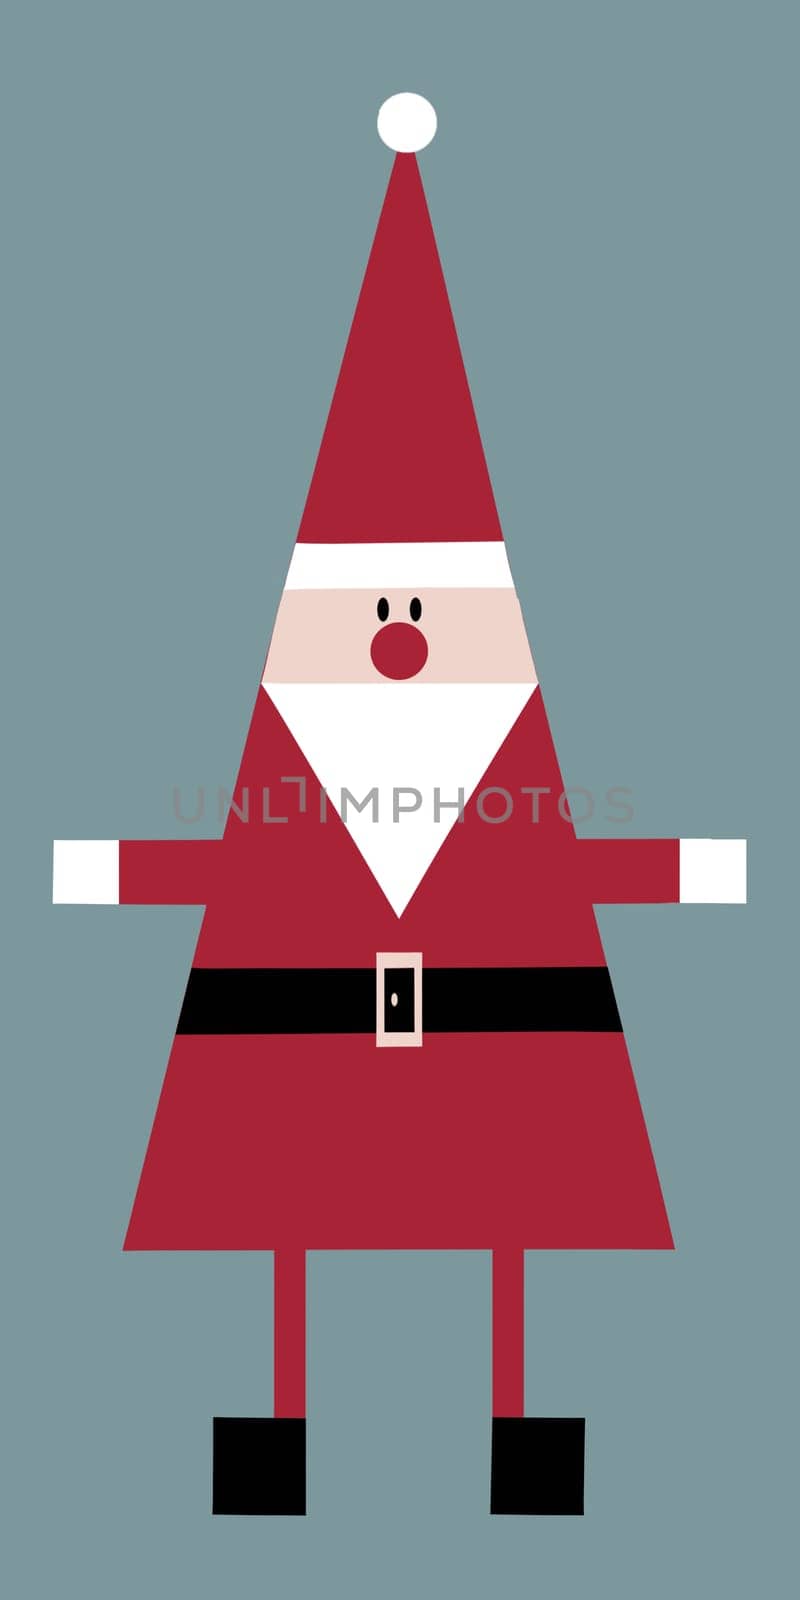 Quirky geometric Santa illustration by RusticPuffin